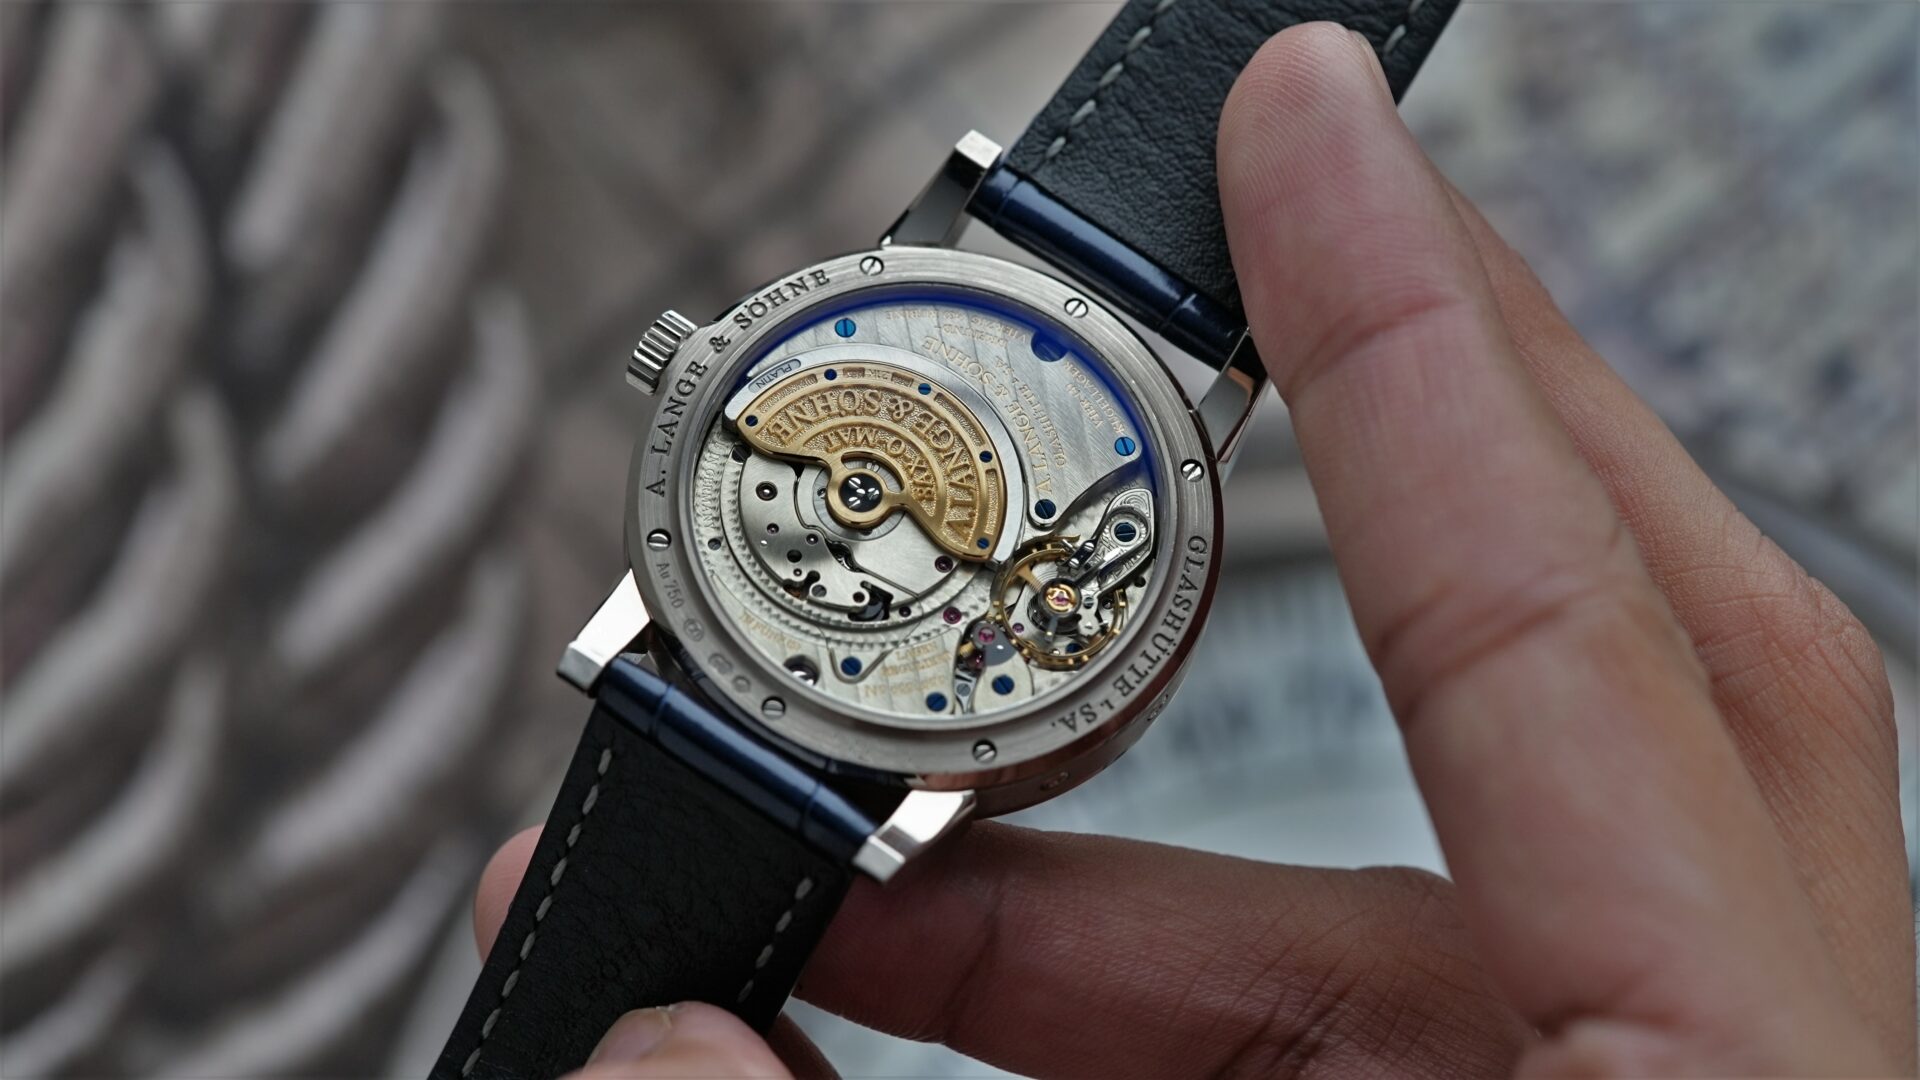 Exhibition caseback on the A. Lange & Söhne Saxonia Annual Calendar watch.